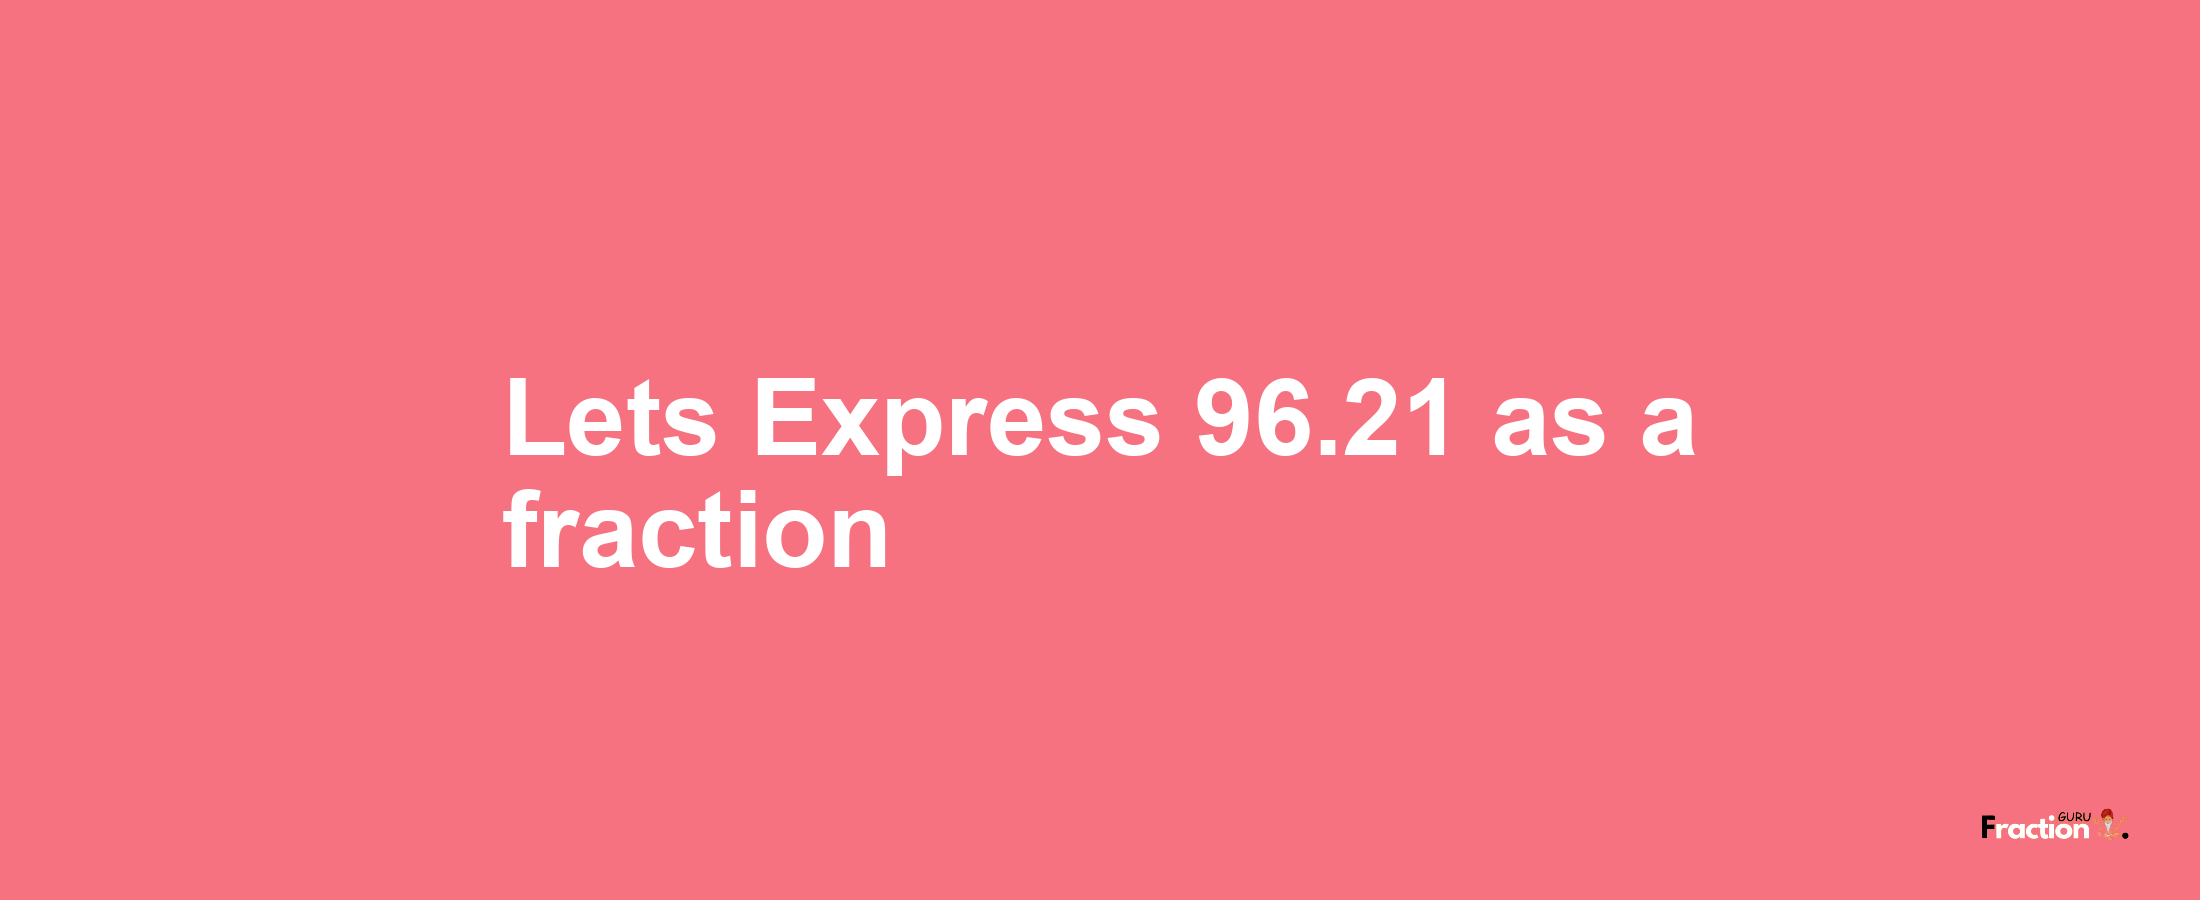 Lets Express 96.21 as afraction